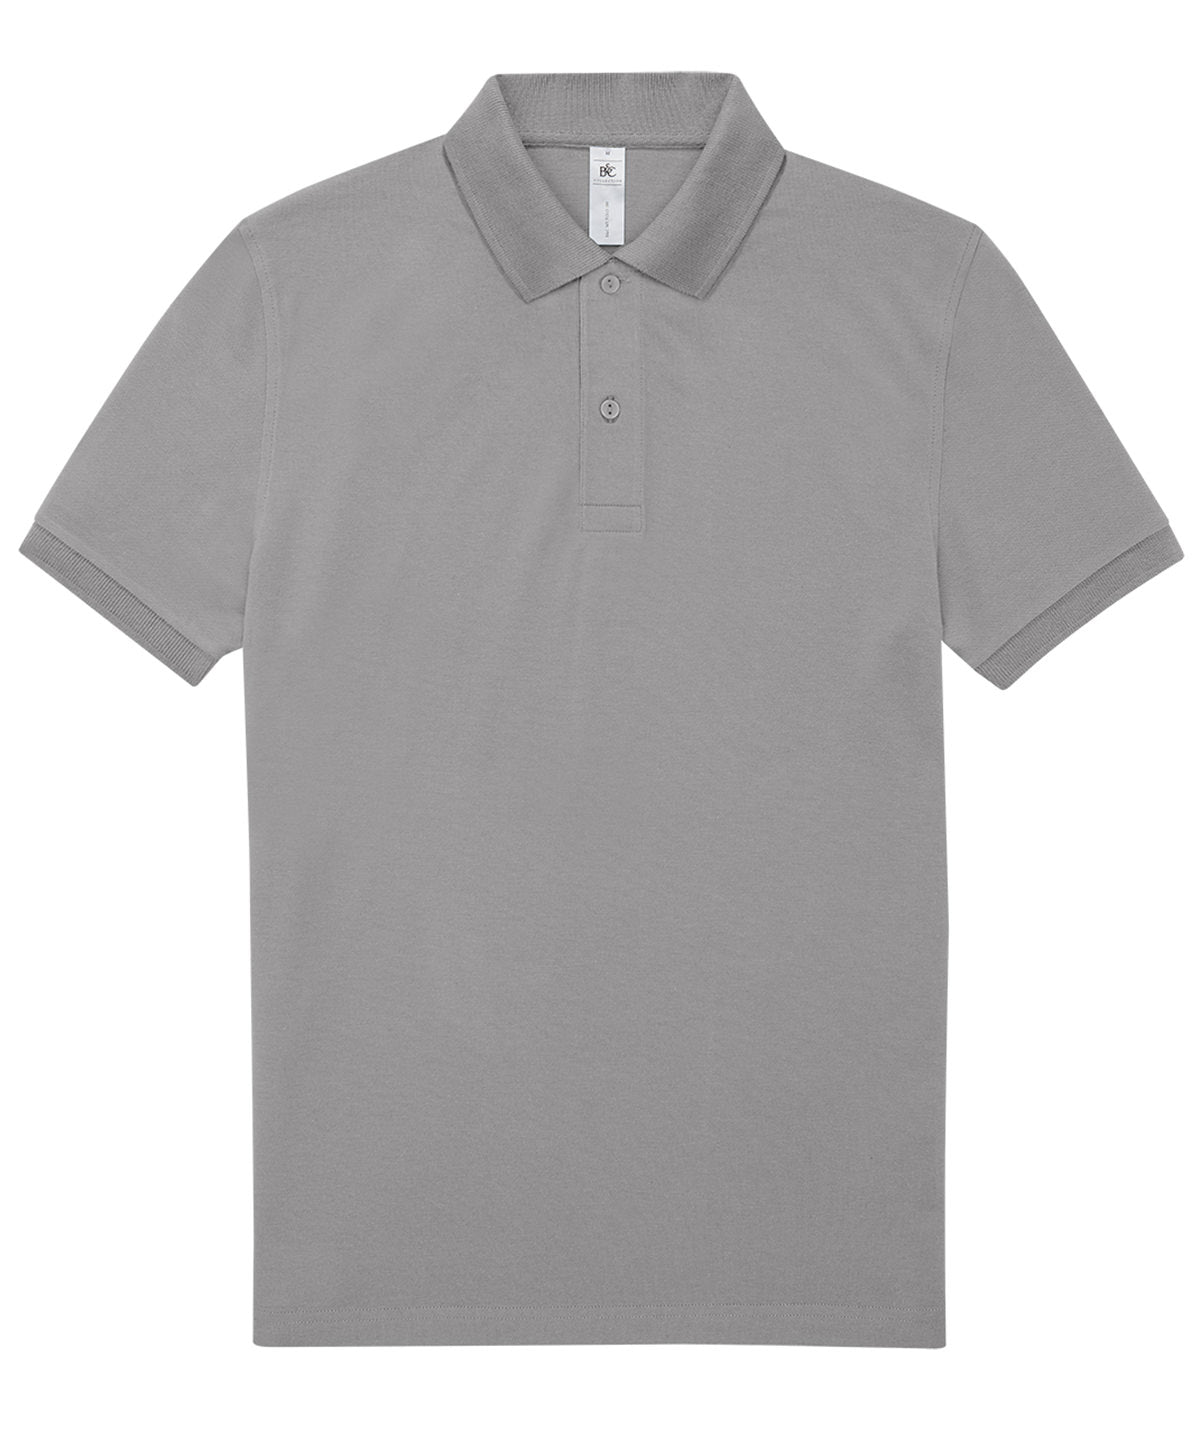 B&C Collection My Polo 180 Sport Grey